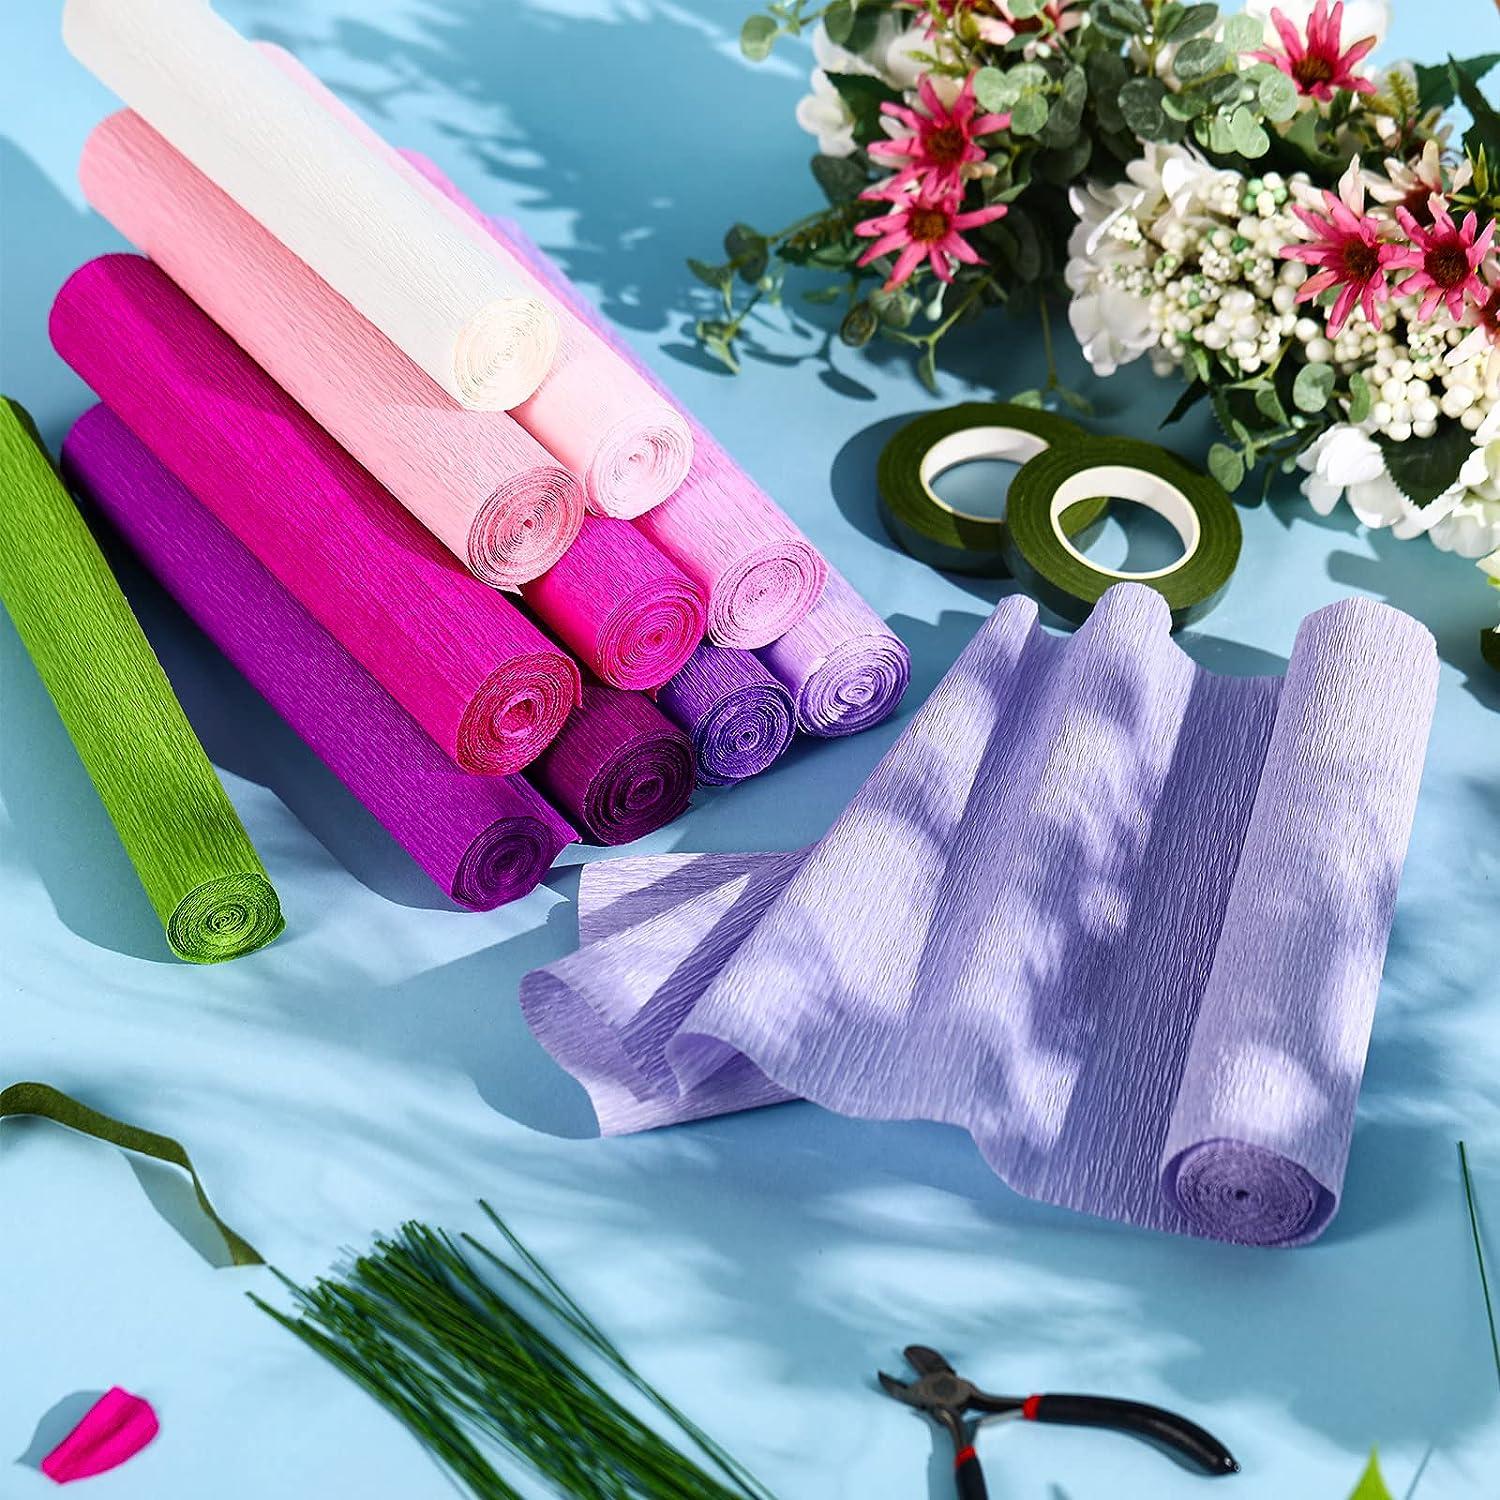 12 Rolls 8 Feet Crepe Paper Sheets Rolls 10 Inch Crepe Paper Streamer 103  Pcs Floral Arrangement Kit Green Floral Tape Floral Wire Stems Wire Cutter